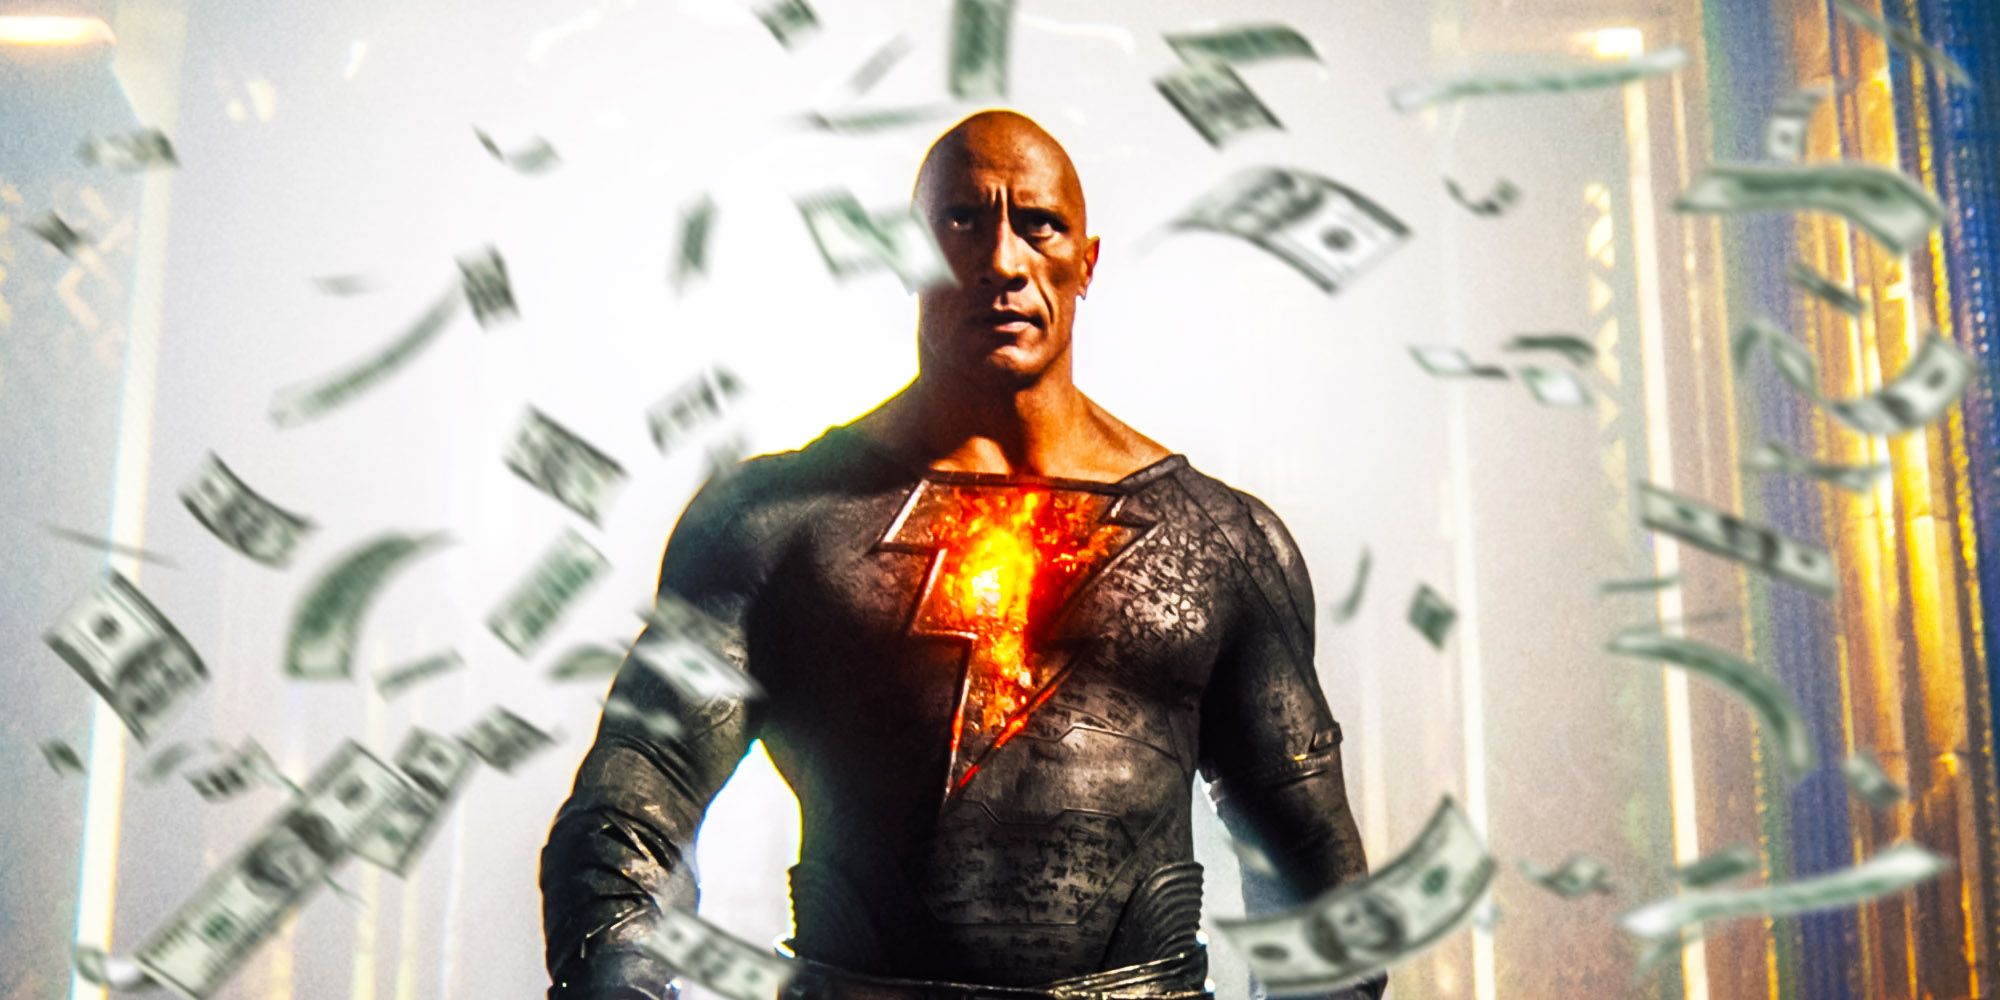 Black Adam' Pulls in Fall's Strongest Weekday at the Domestic Box Office -  Murphy's Multiverse